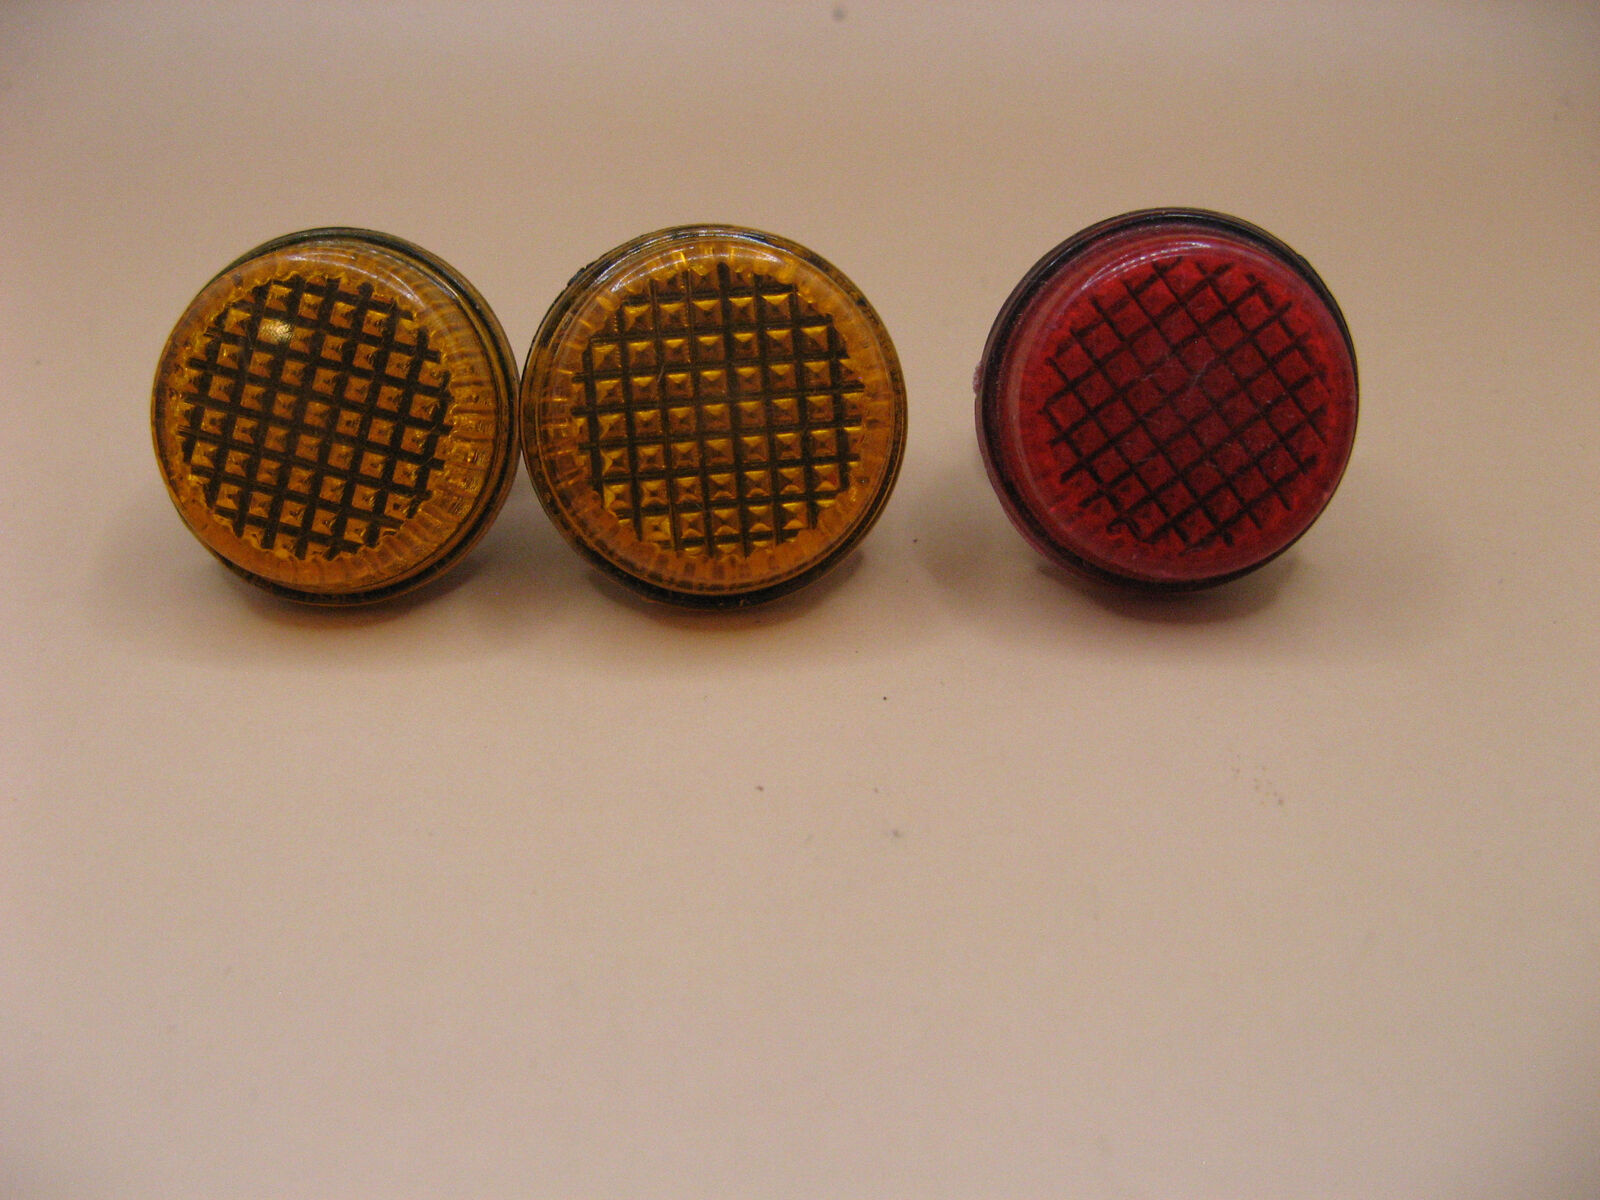 Lot Of 3 Vintage Bicycle Bike Cycling License Plate Reflectors 2 Yellow & 1 Red